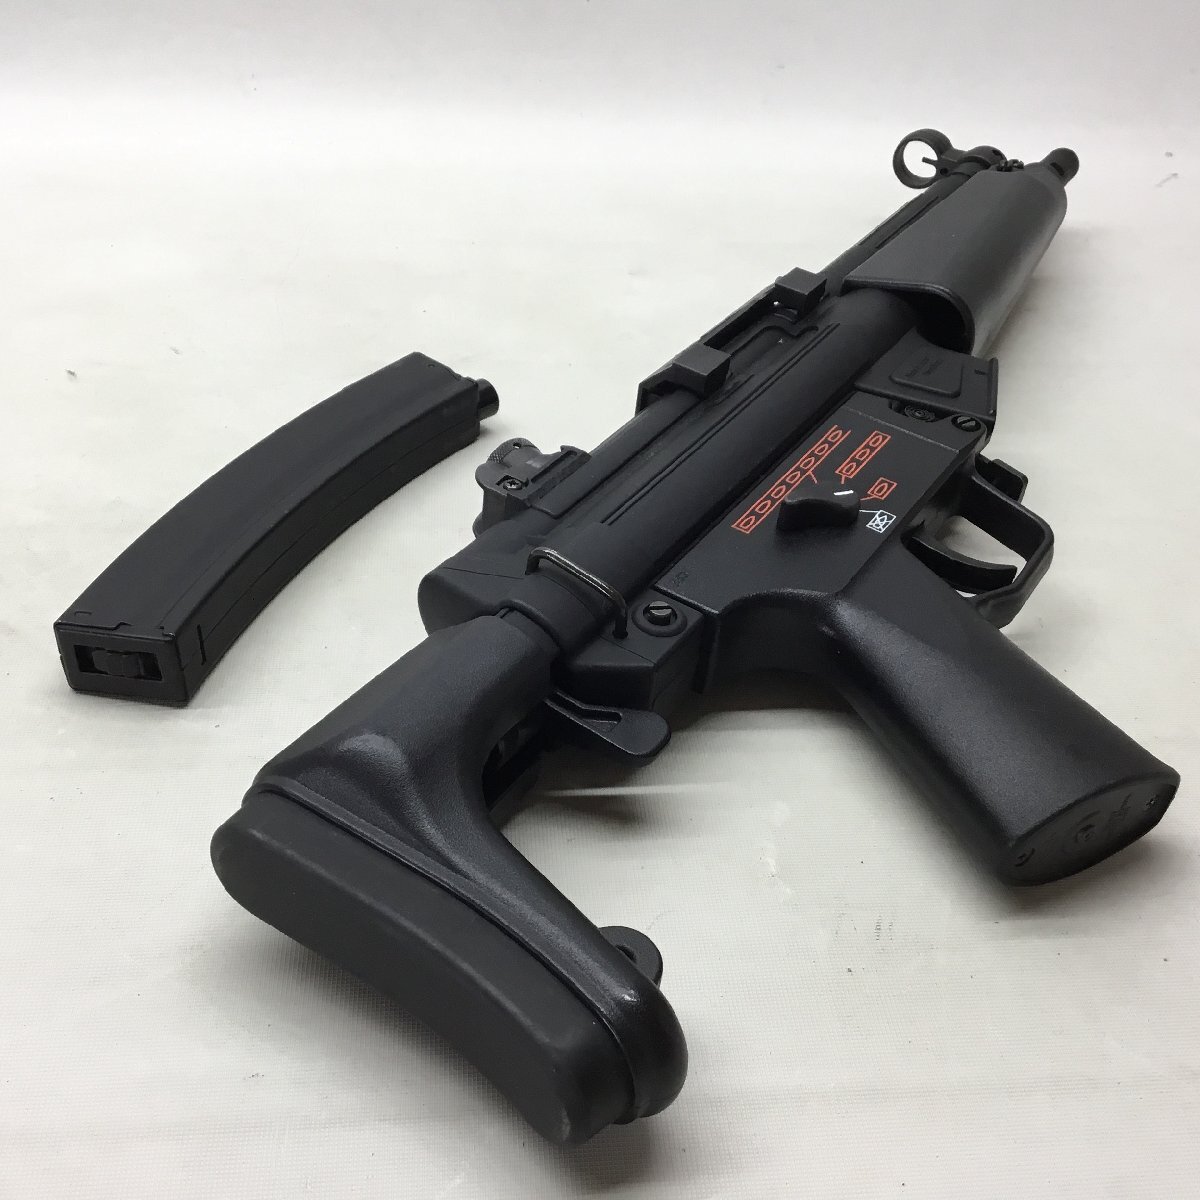 #TOKYO MARUI Tokyo Marui automatic electric air gun MP5 A5/JP battery deterioration according to operation unknown junk /3.59kg